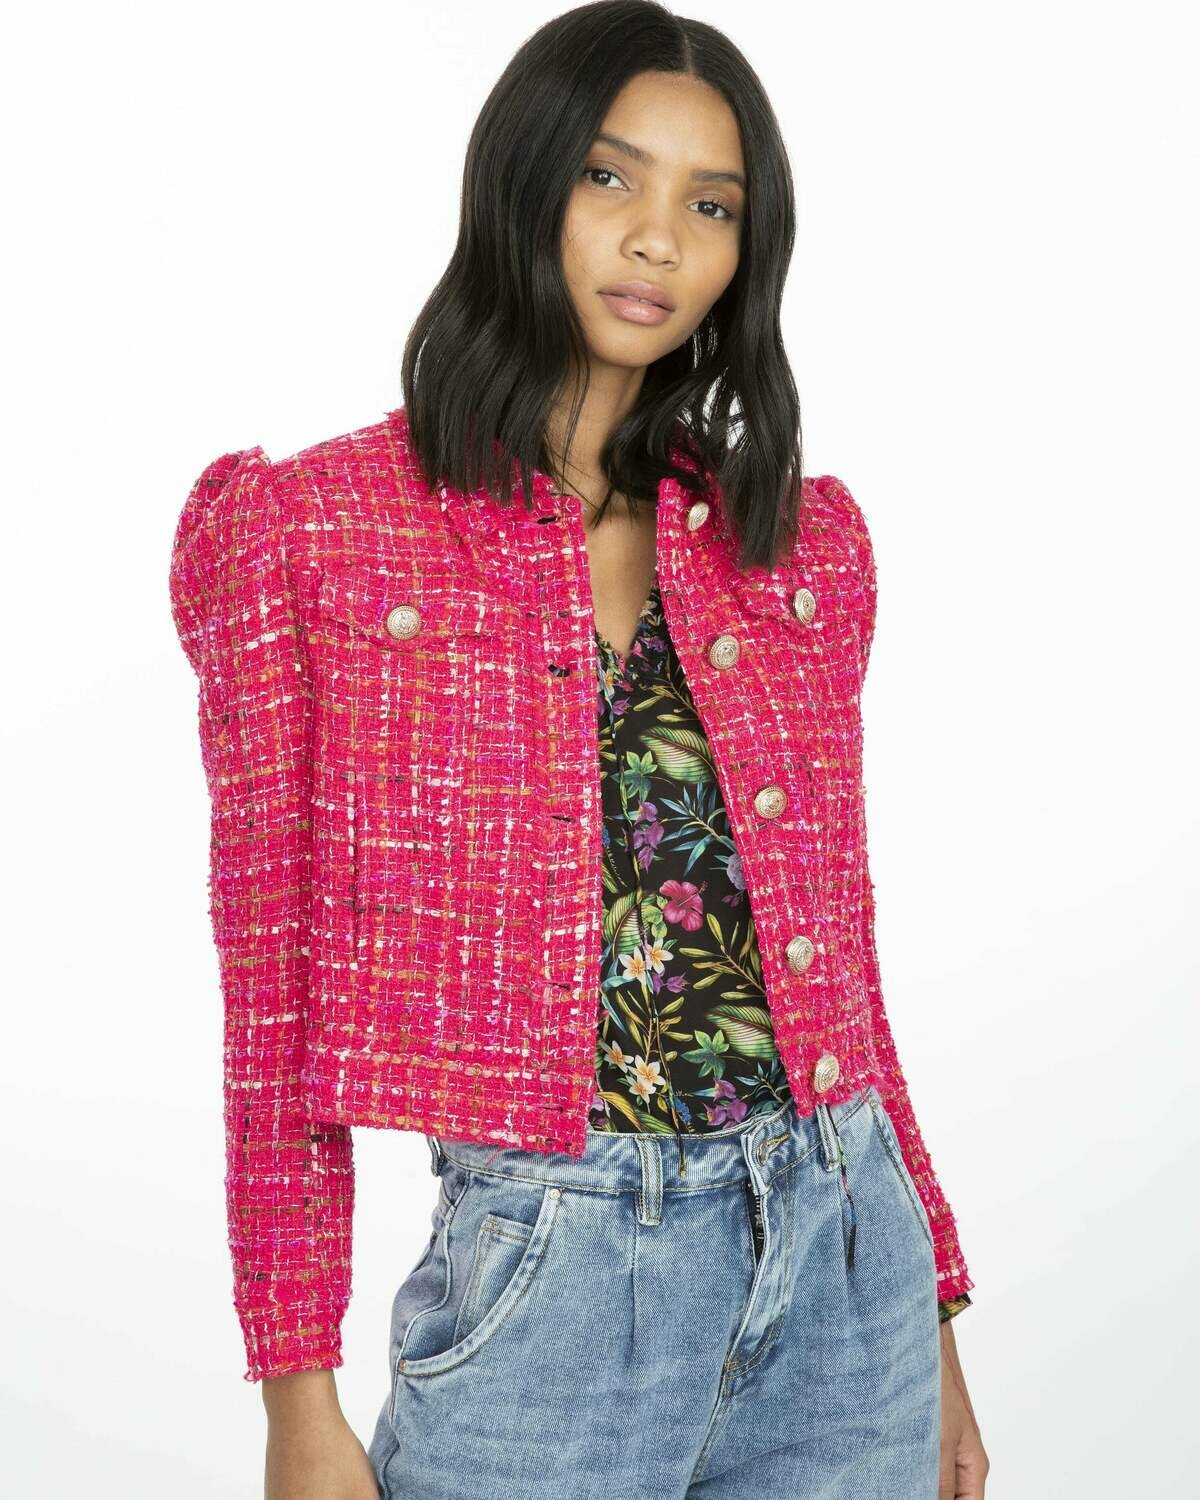 Pink "Chanel " inspired tweed Jacket | Women's Designer Casual Chic Clothing  | Engle Shop Too